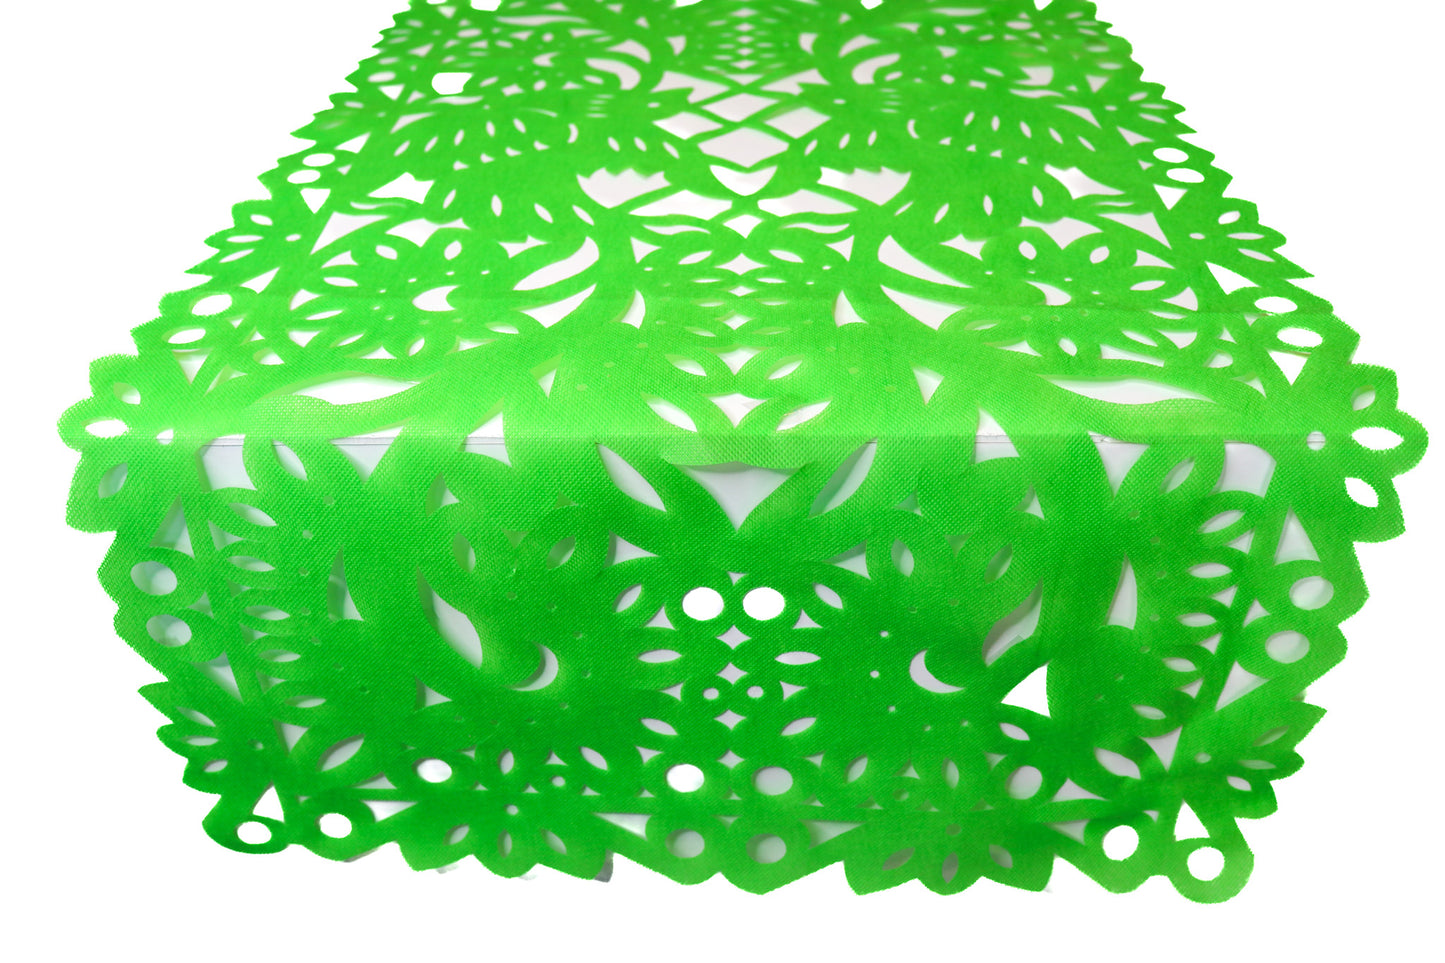 Mexican Fabric Table Runner Papel Picado Design Lime Green